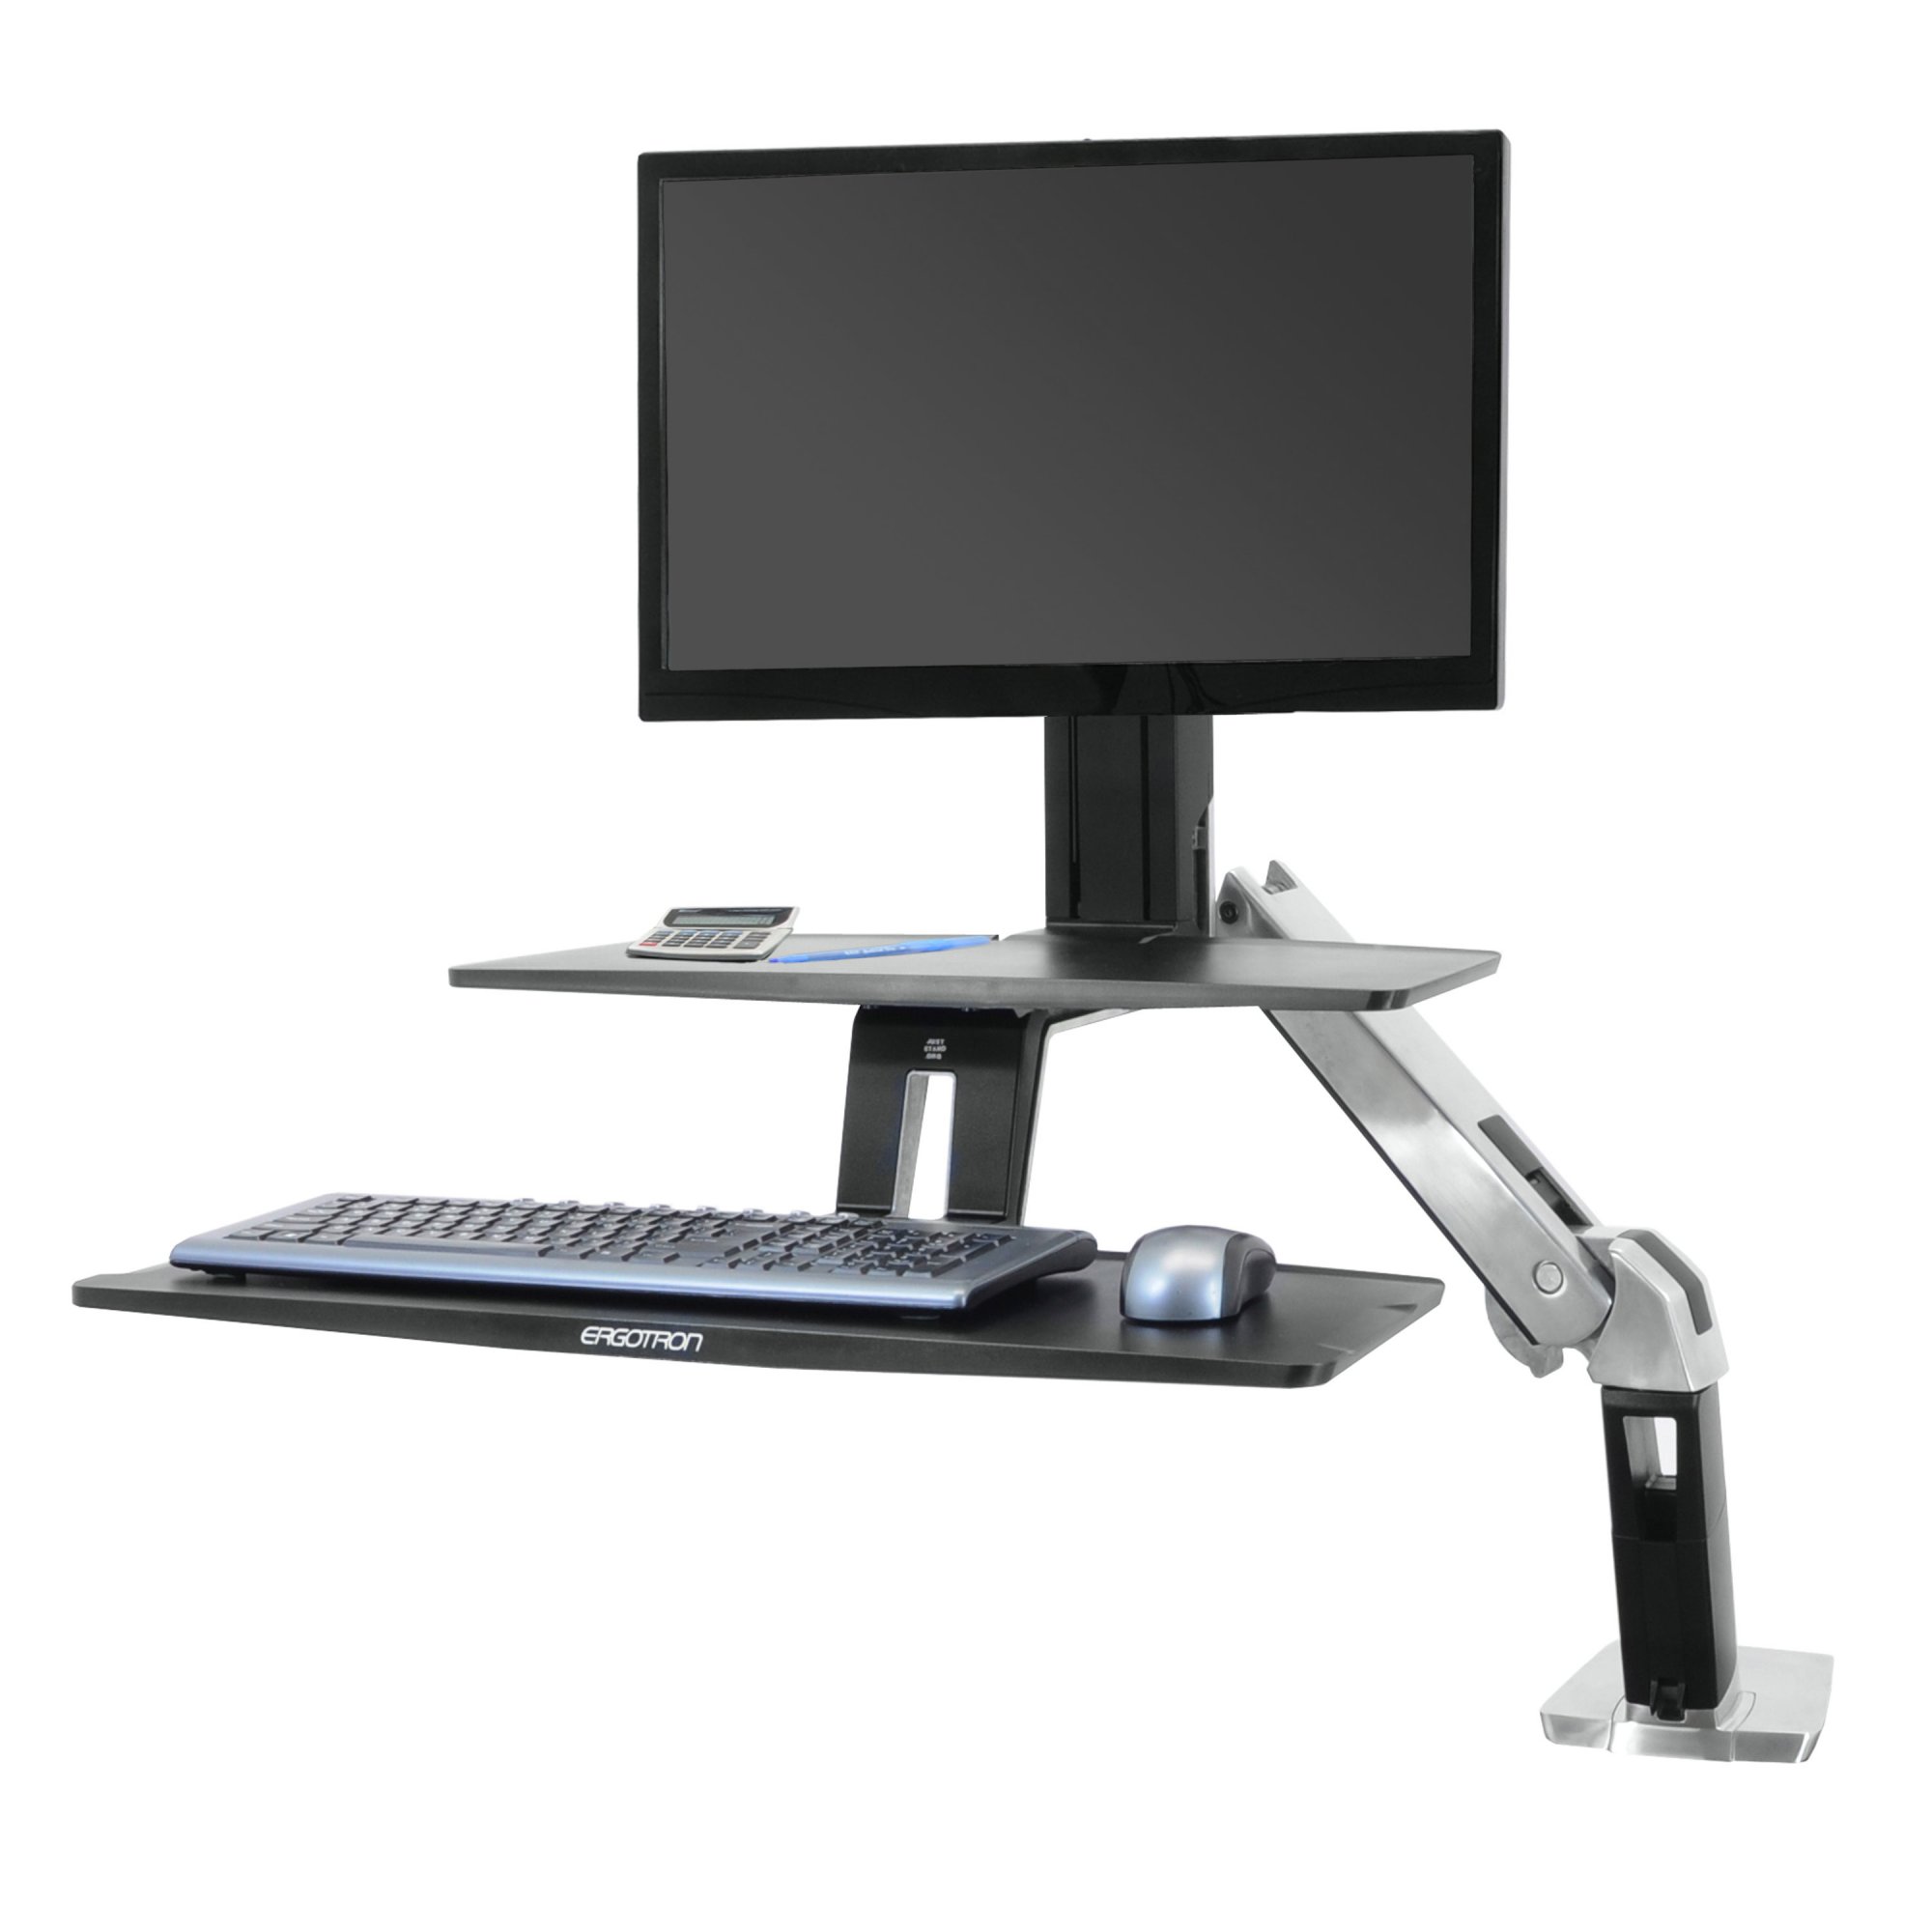 Ergotron 24-391-026 WorkFit-A with Suspended Keyboard, Single HD